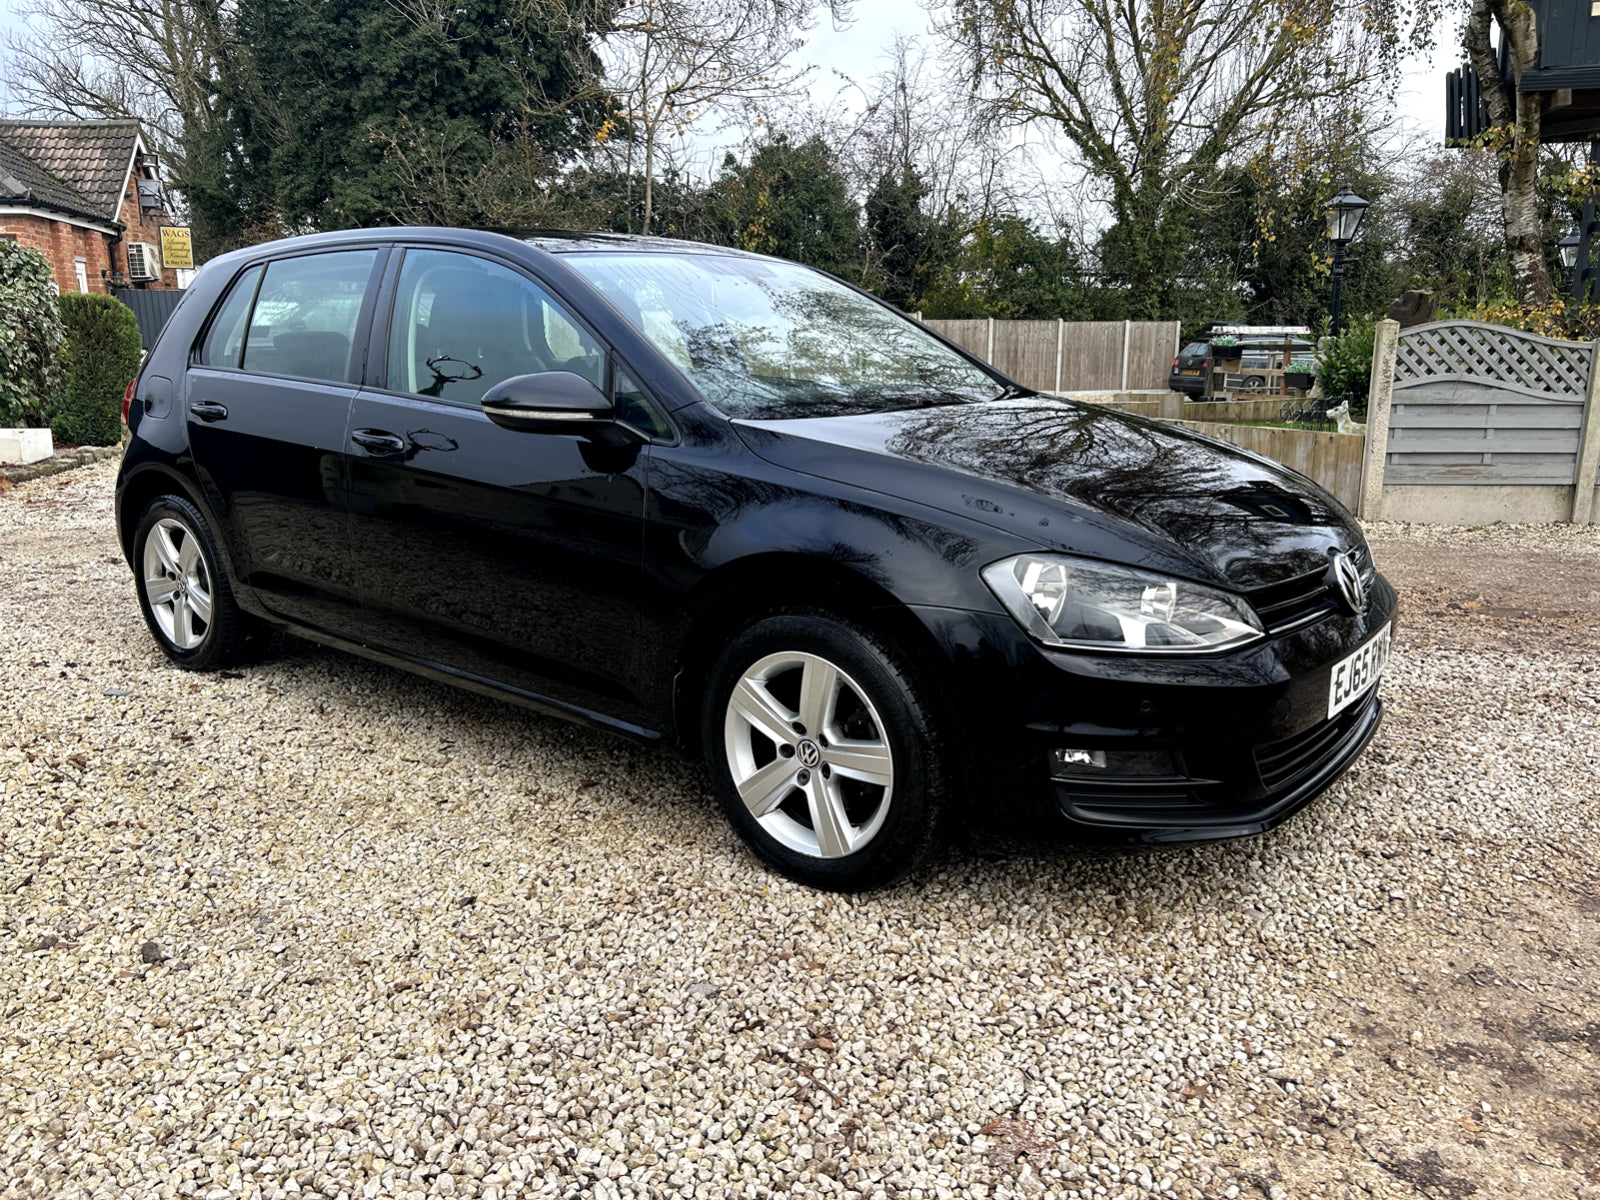 Bid on 2015 VOLKSWAGEN GOLF TDI 1.6 BLUE MOTION 2X KEYS- Buy &amp; Sell on Auction with EAMA Group